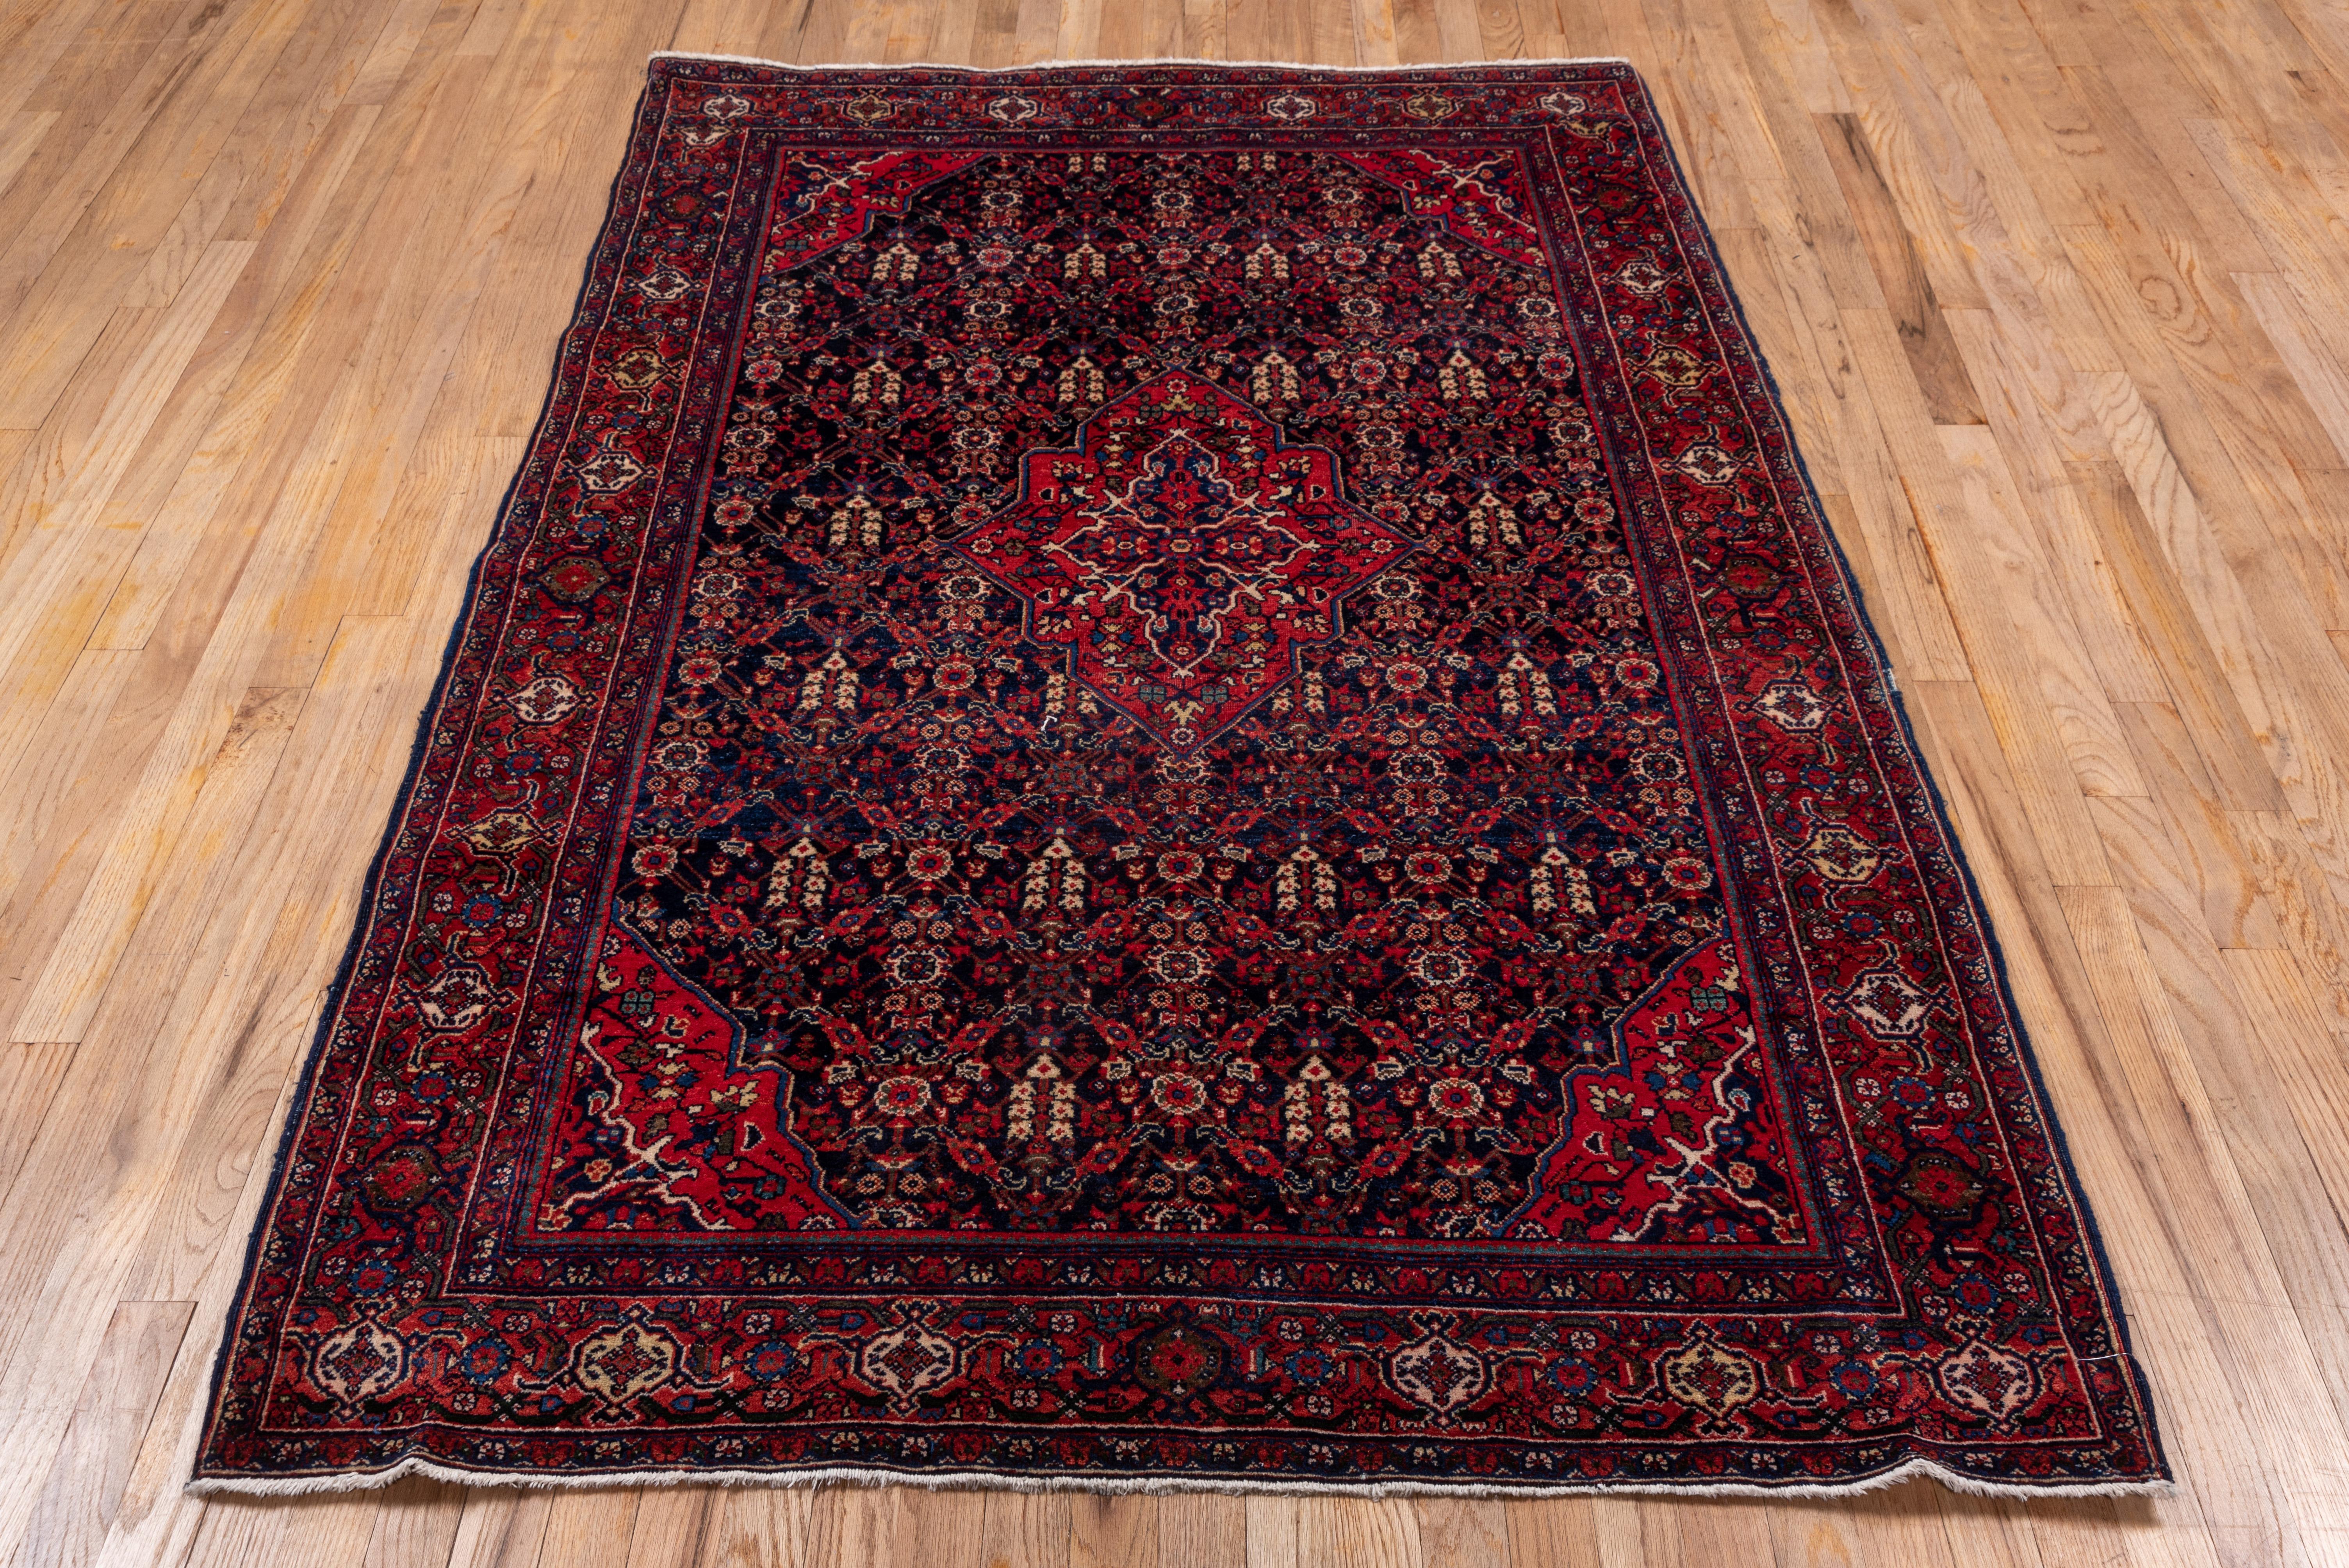 This well-woven west Persian scatter shows a Gol Hennai pattern floriate lattice accented in ivory, red and green, with a red cartouche medallion and matching red quarter corners, on a well-abrashed dark to royal blue ground. Red reversing turtle